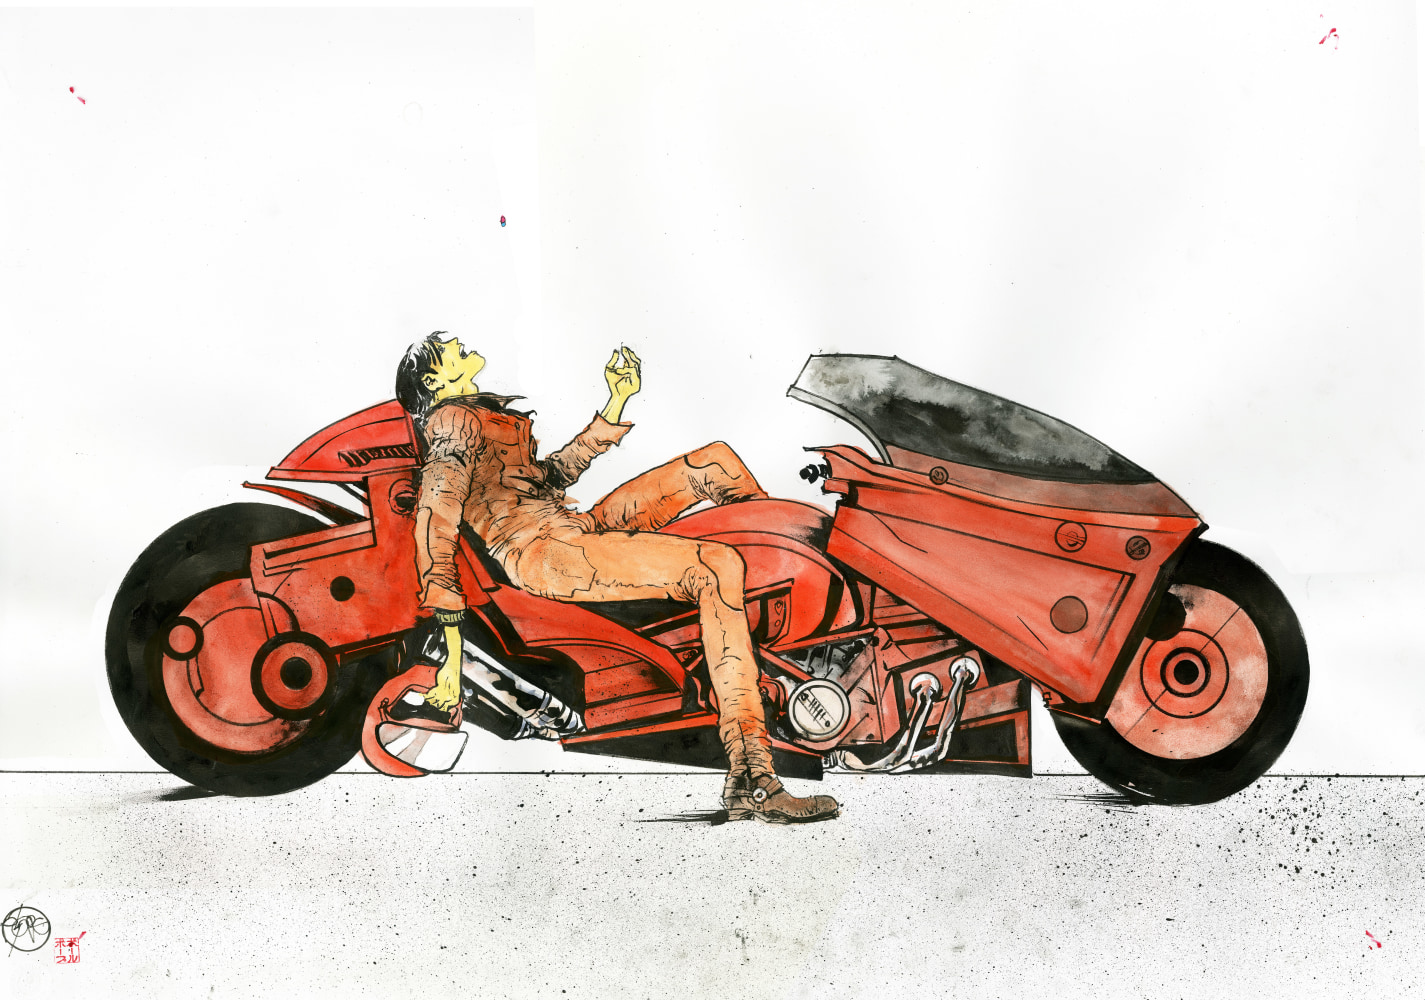 Paul Pope
A Tribute to Otomo from Paul Pope, 2021
Mixed media on paper
23 x 29 inches
$13,800 - Sold

&amp;nbsp;